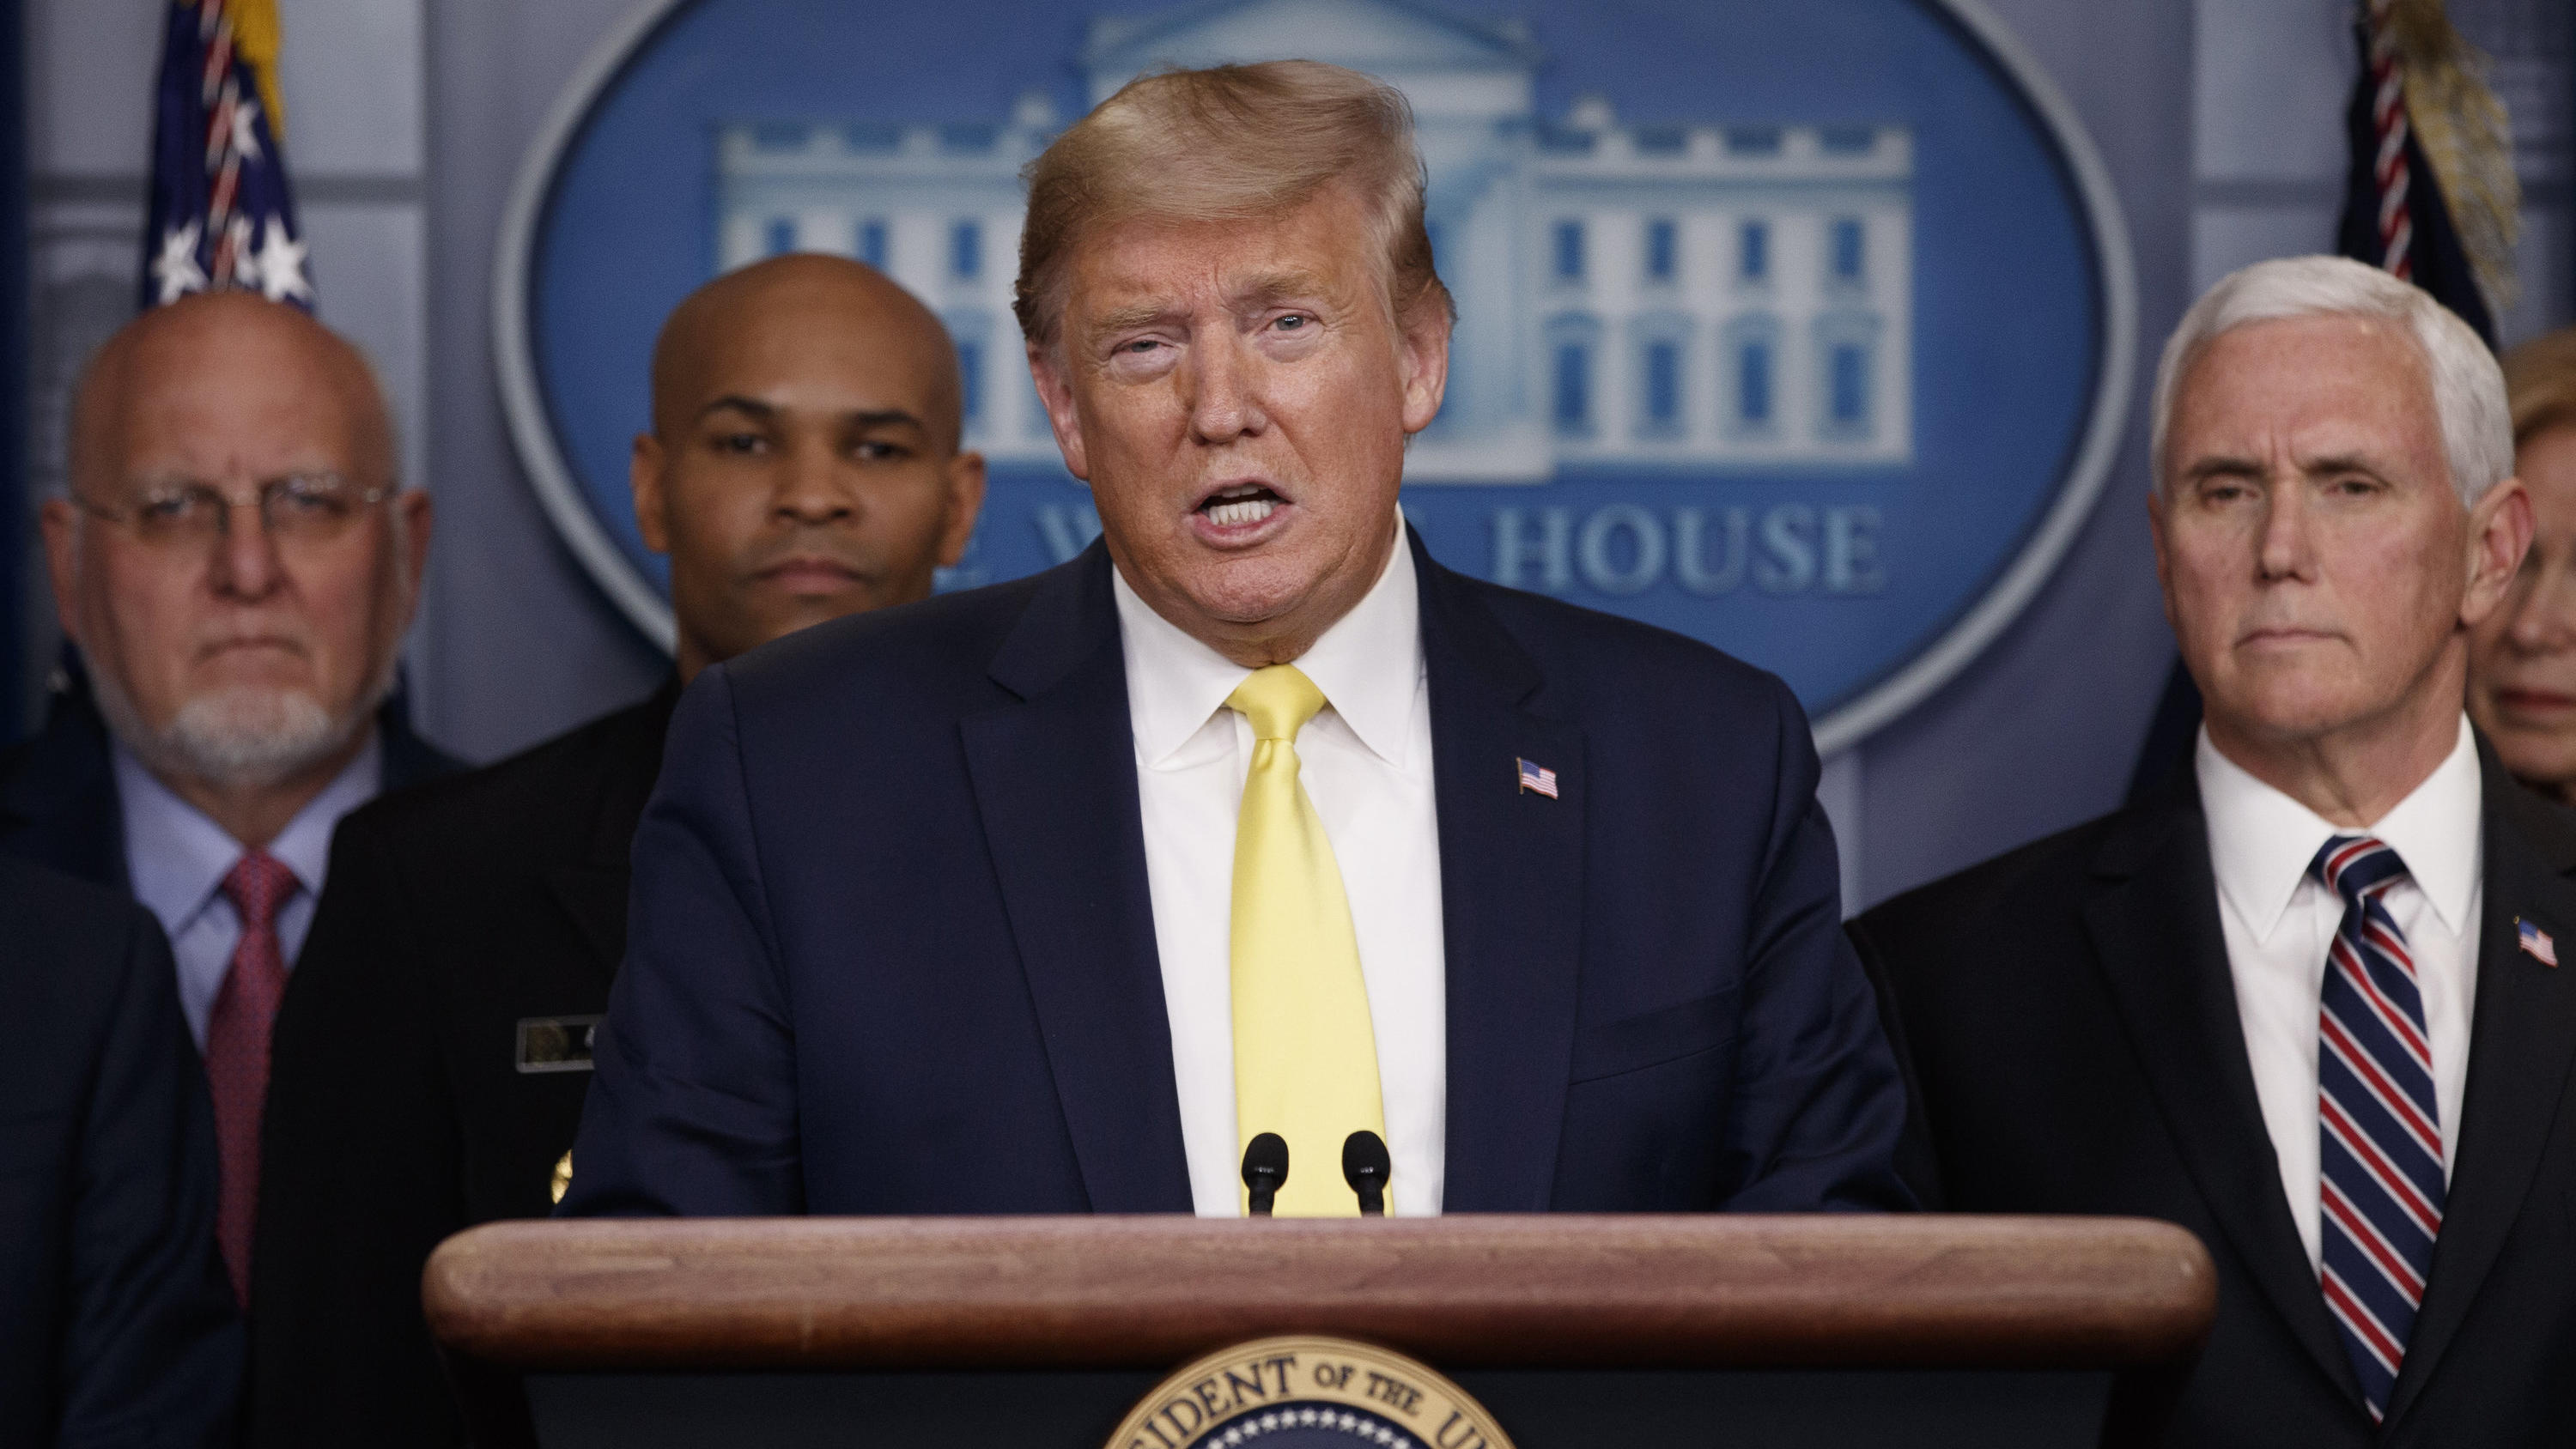 In this March 9, 2020, photo, President Donald Trump speaks in the briefing room of the White House in Washington about the coronavirus outbreak as Dr. Robert Redfield, director of the Centers for Disease Control and Prevention, Surgeon General Jerom